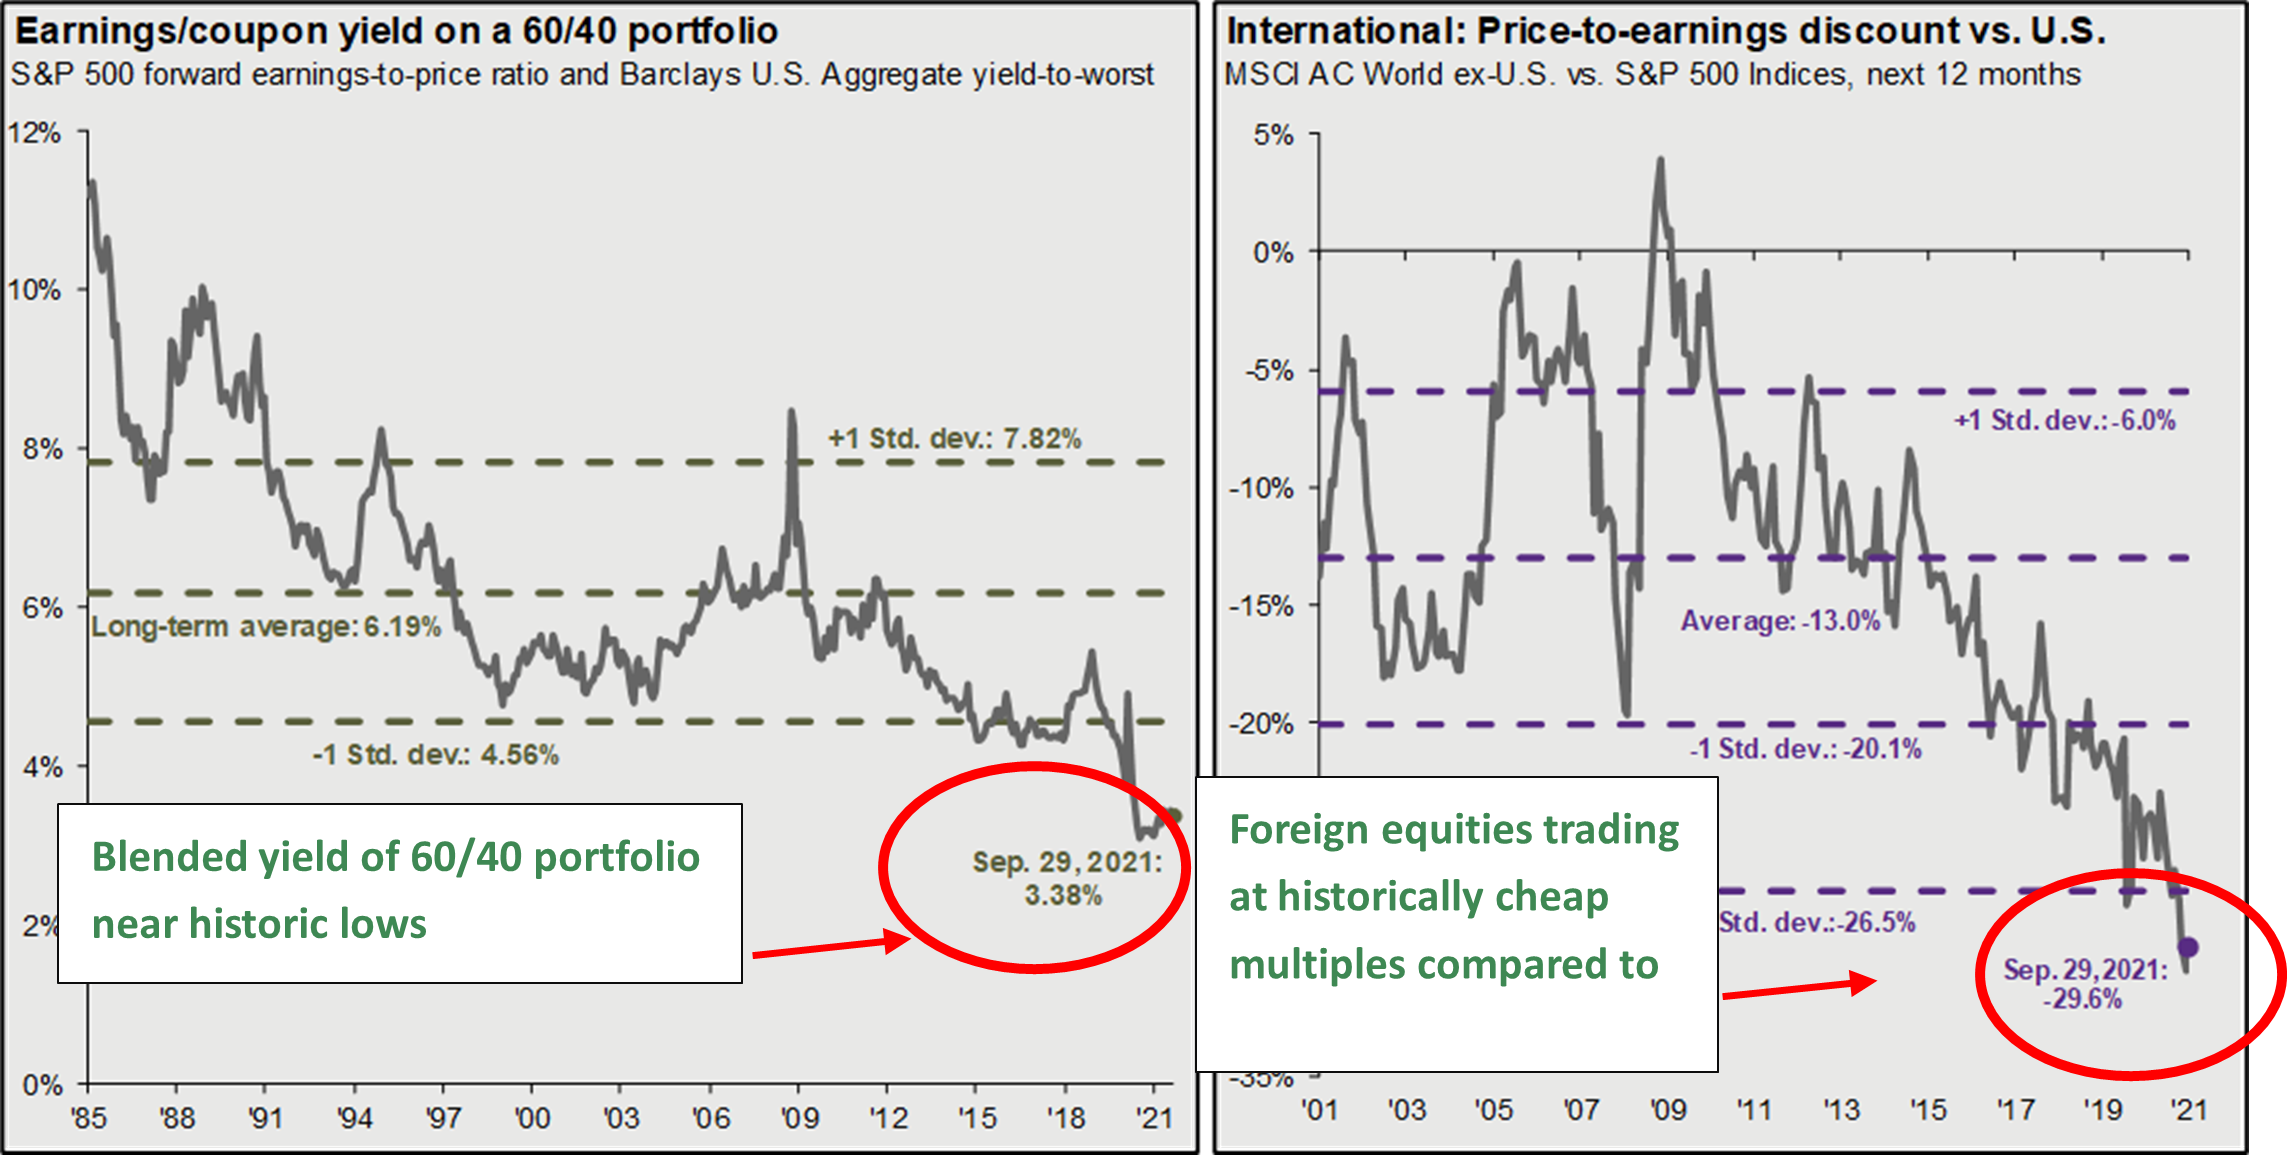 Chart depicting Earnings/coupon yield on a 60/40 portfolio from 1985 to 2021 with text: Blended yield of 60/40 portfolio near historic lows, and chart depicting International: Price-to-earnings discount vs. U.S. from 2001 to 2021 with text: Foreign equities trading at historically cheap multiples compared to large cap US equities